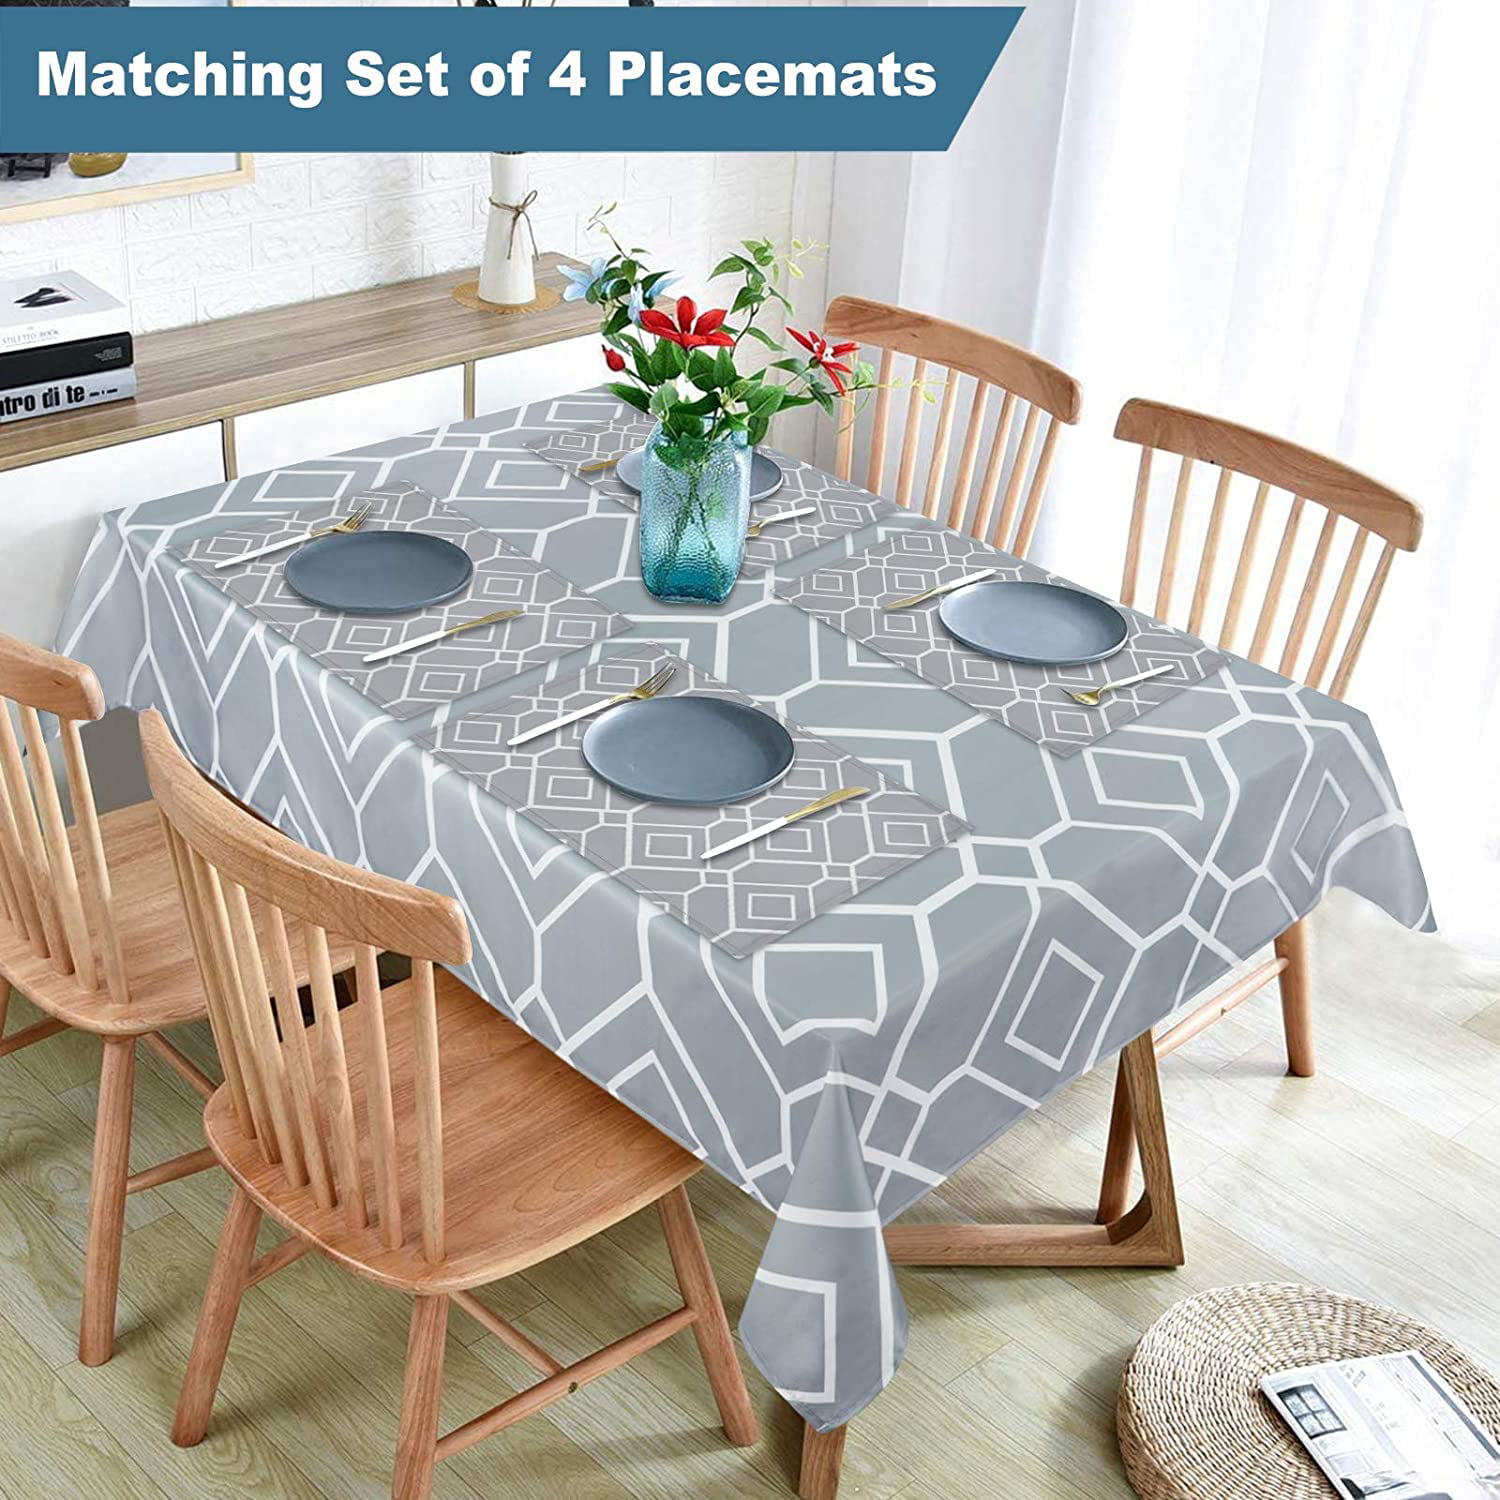 Details about   Tablecloth Geometric Multi Functional Waterproof Table Cloth for Outdoor Home 